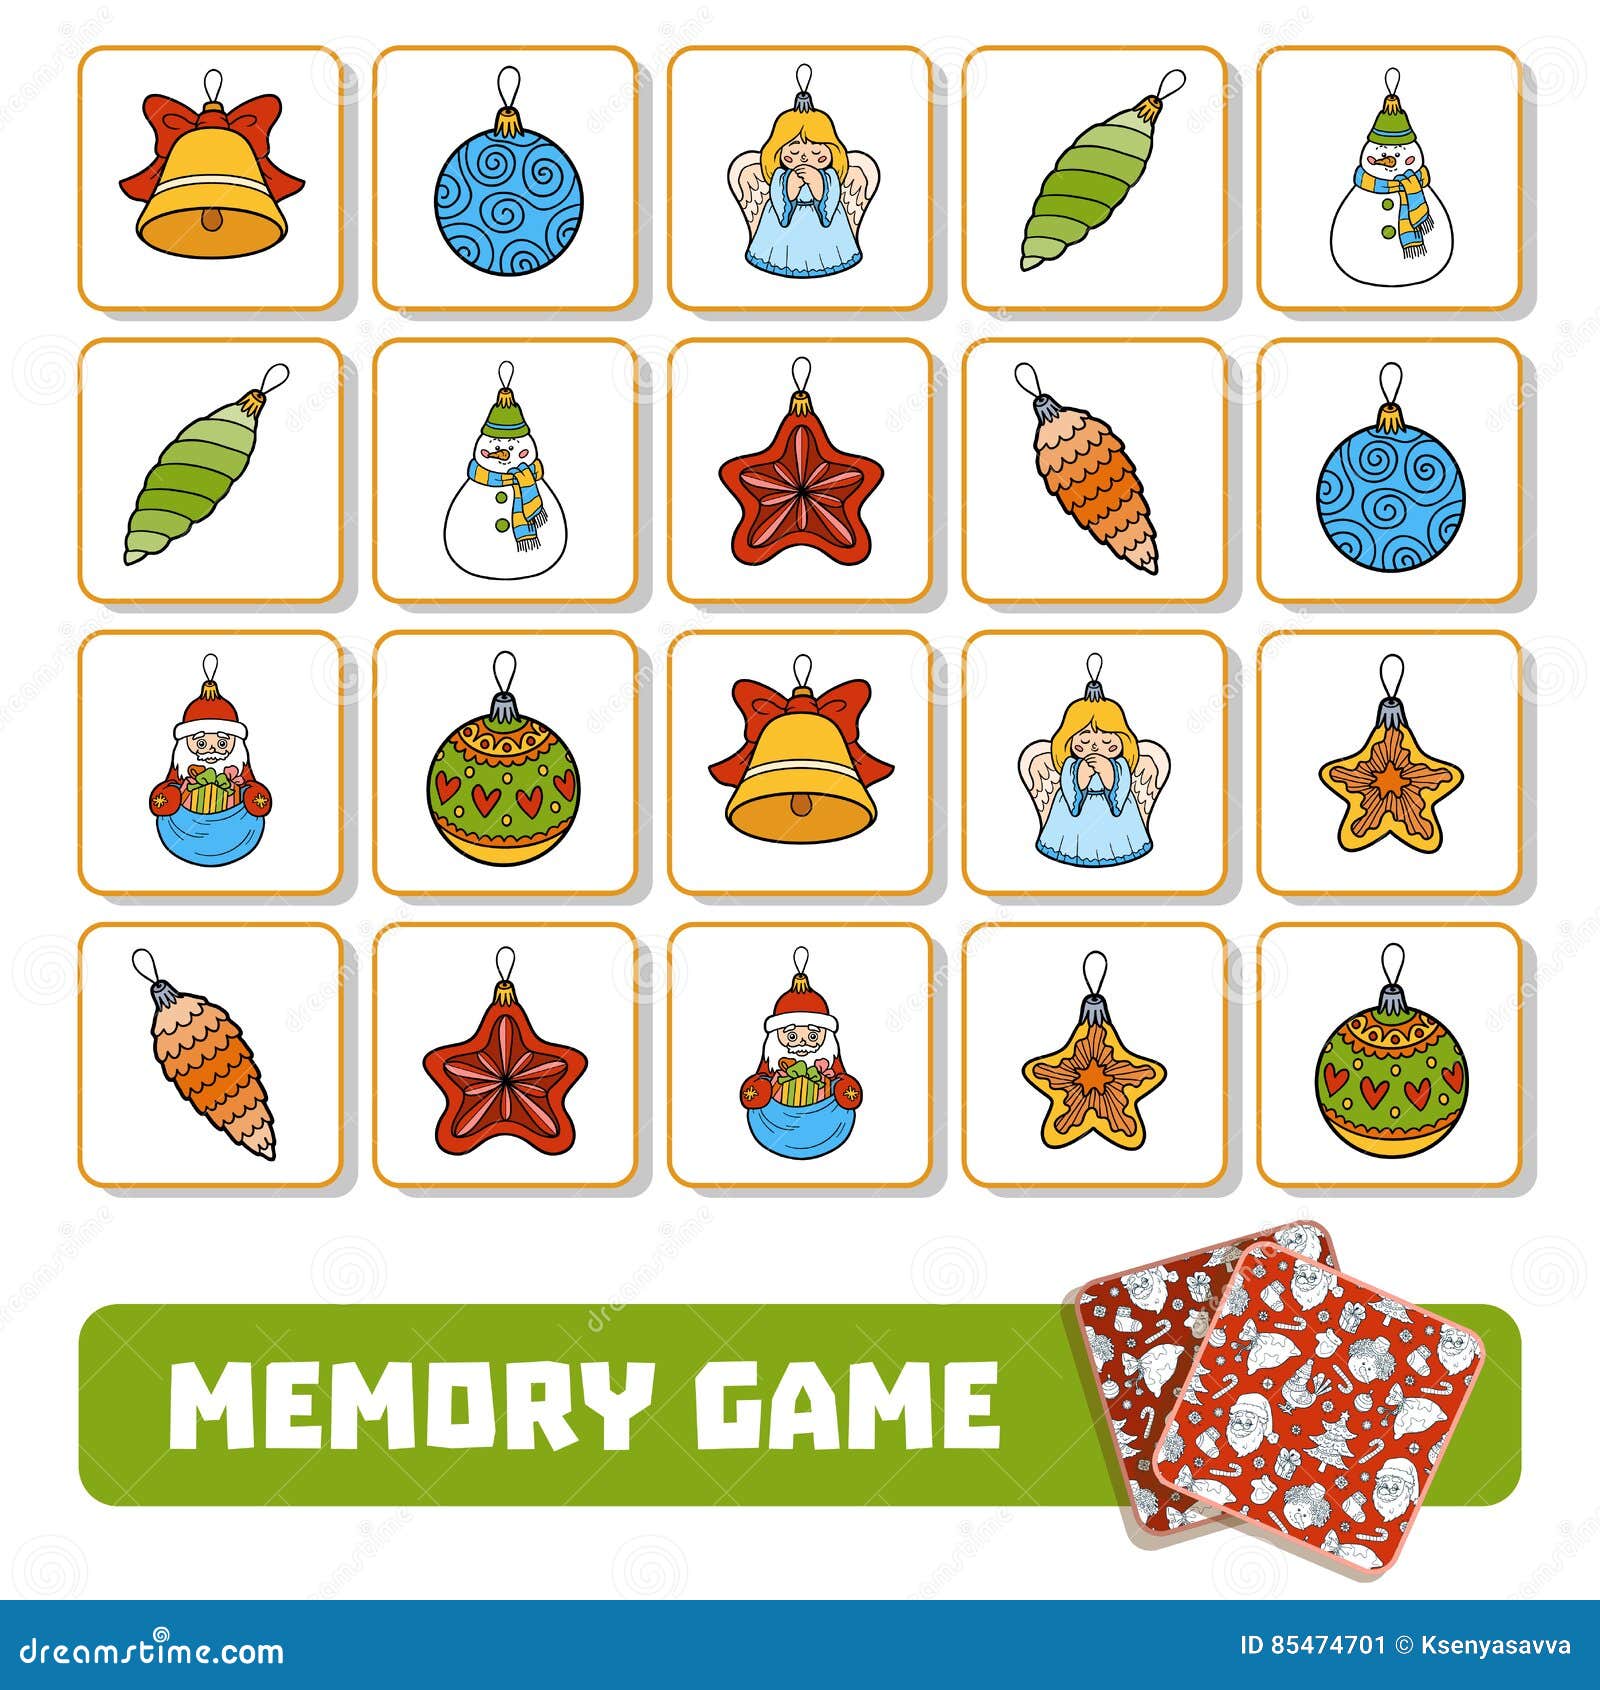 memory game for children, cards with christmas tree toys